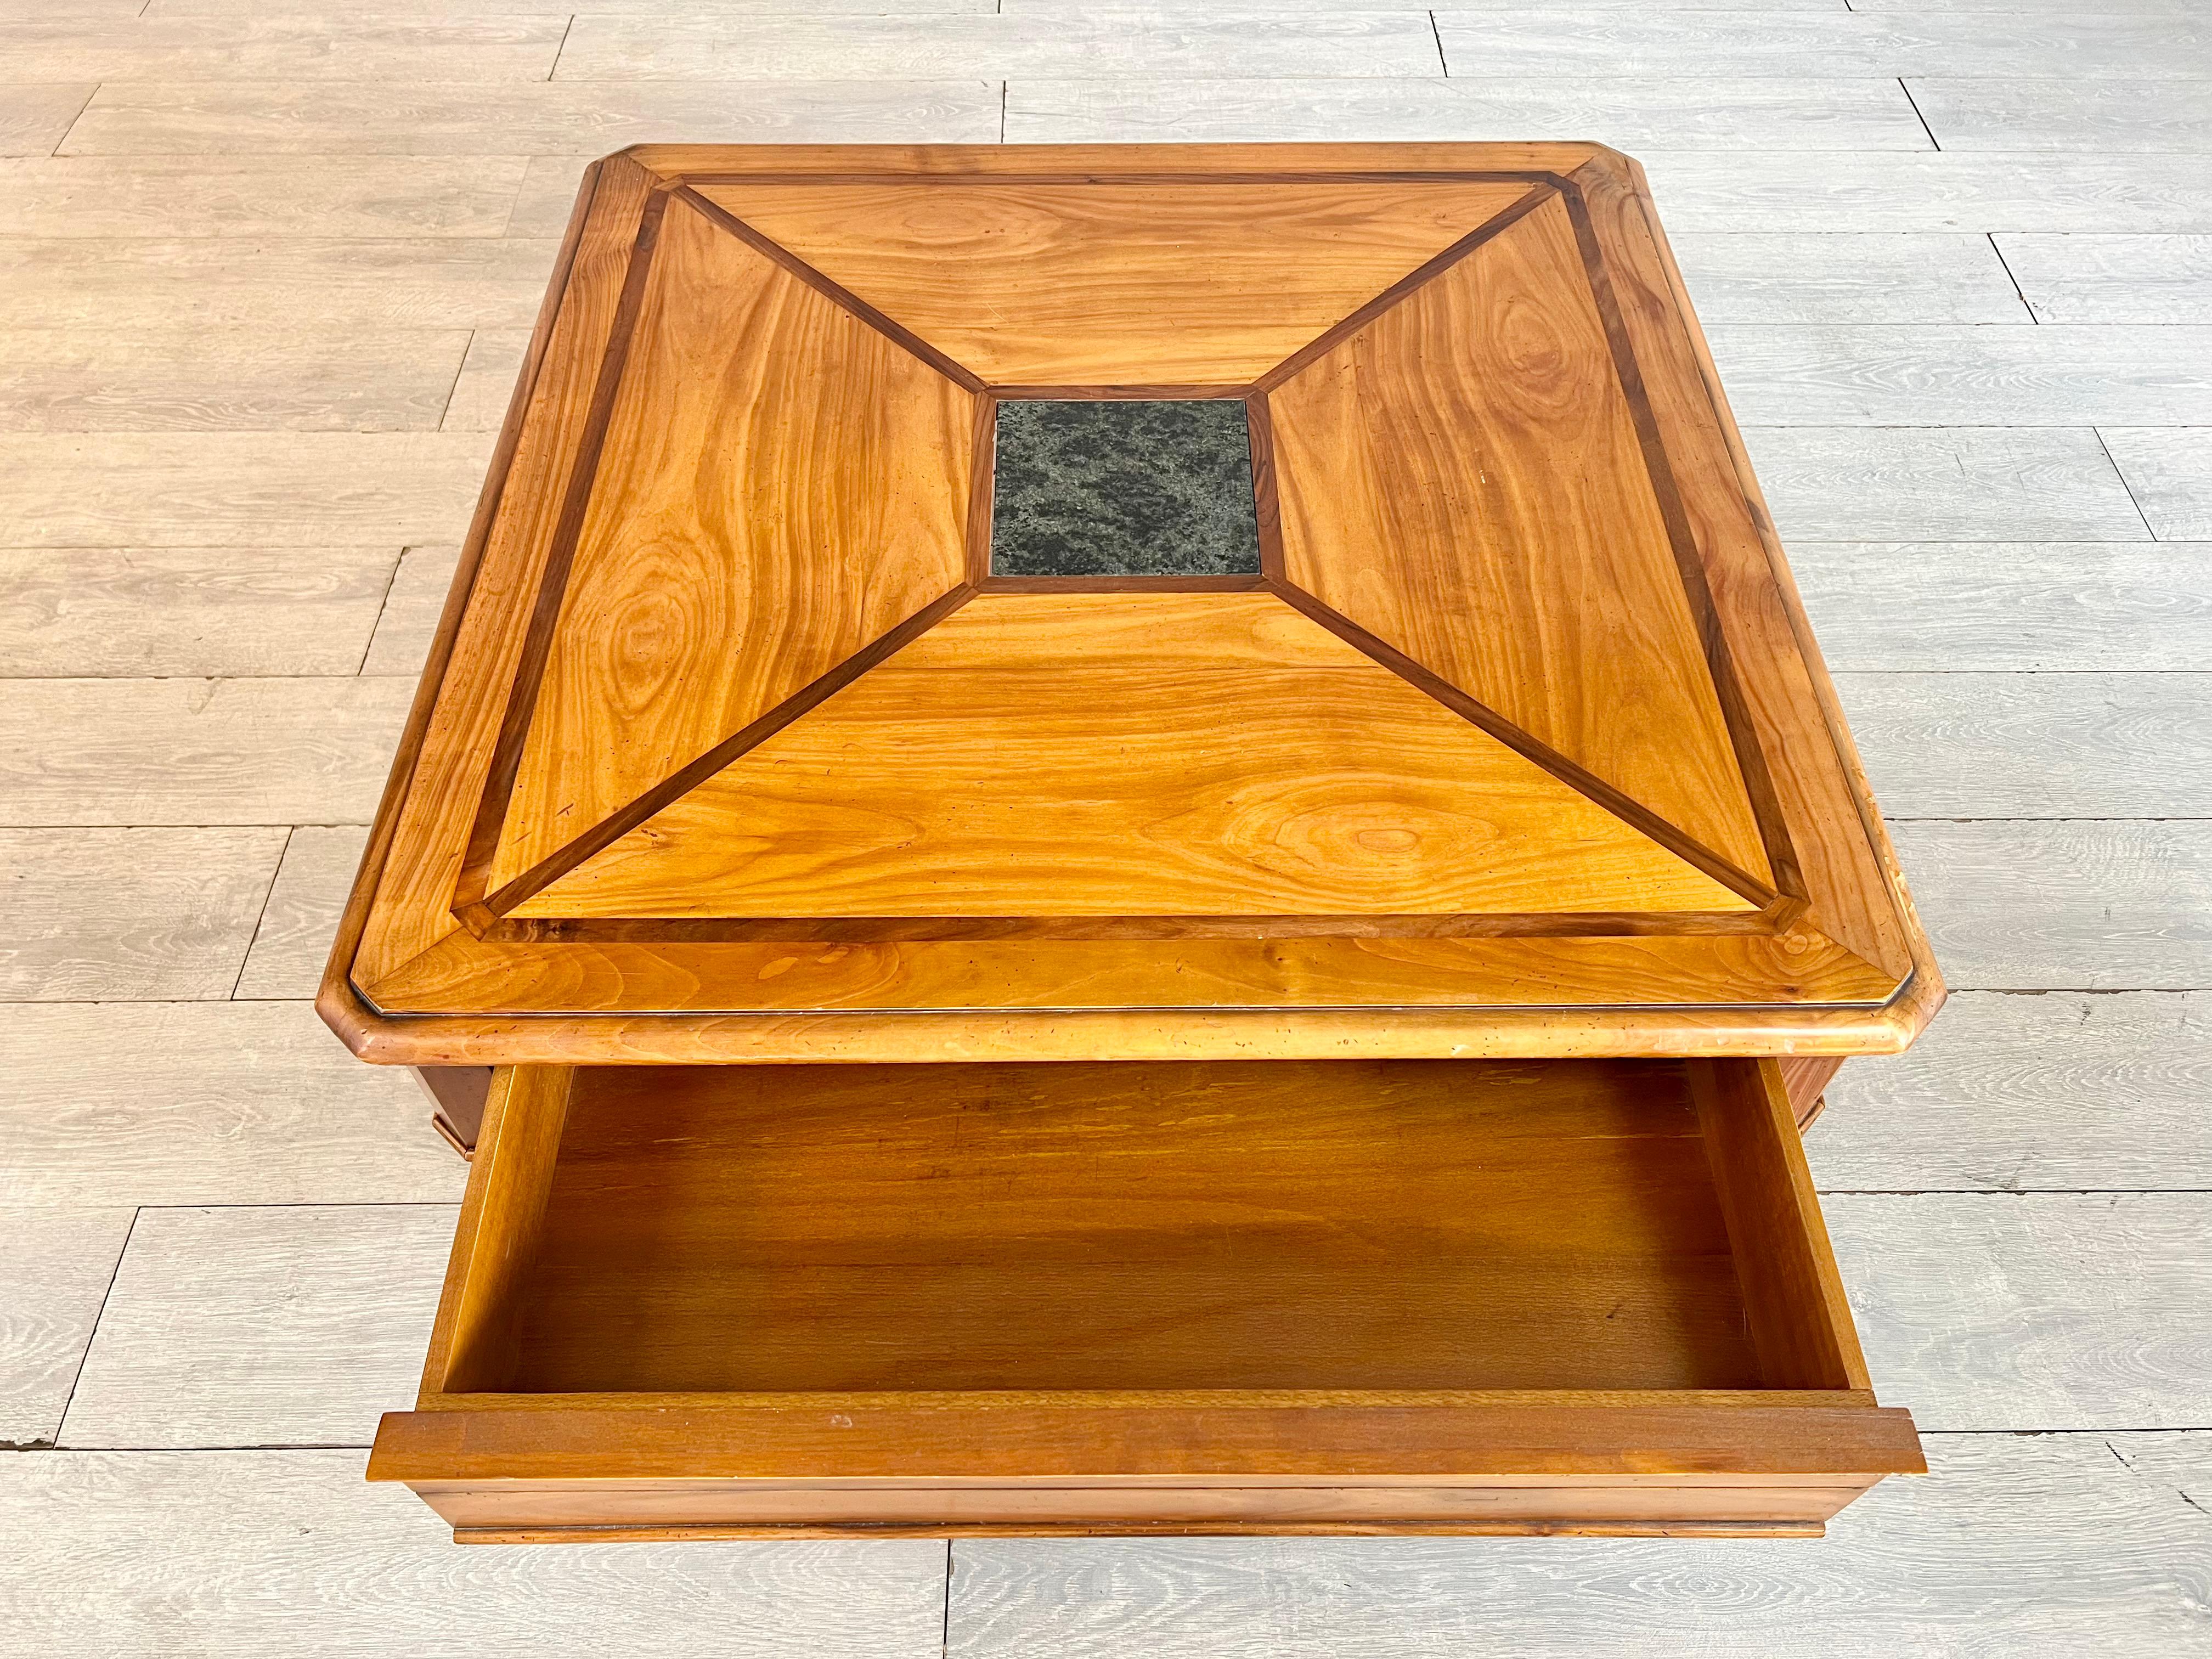 Intricate Swiss Square Coffee Table With Geometric Design and Marble Inlay For Sale 6